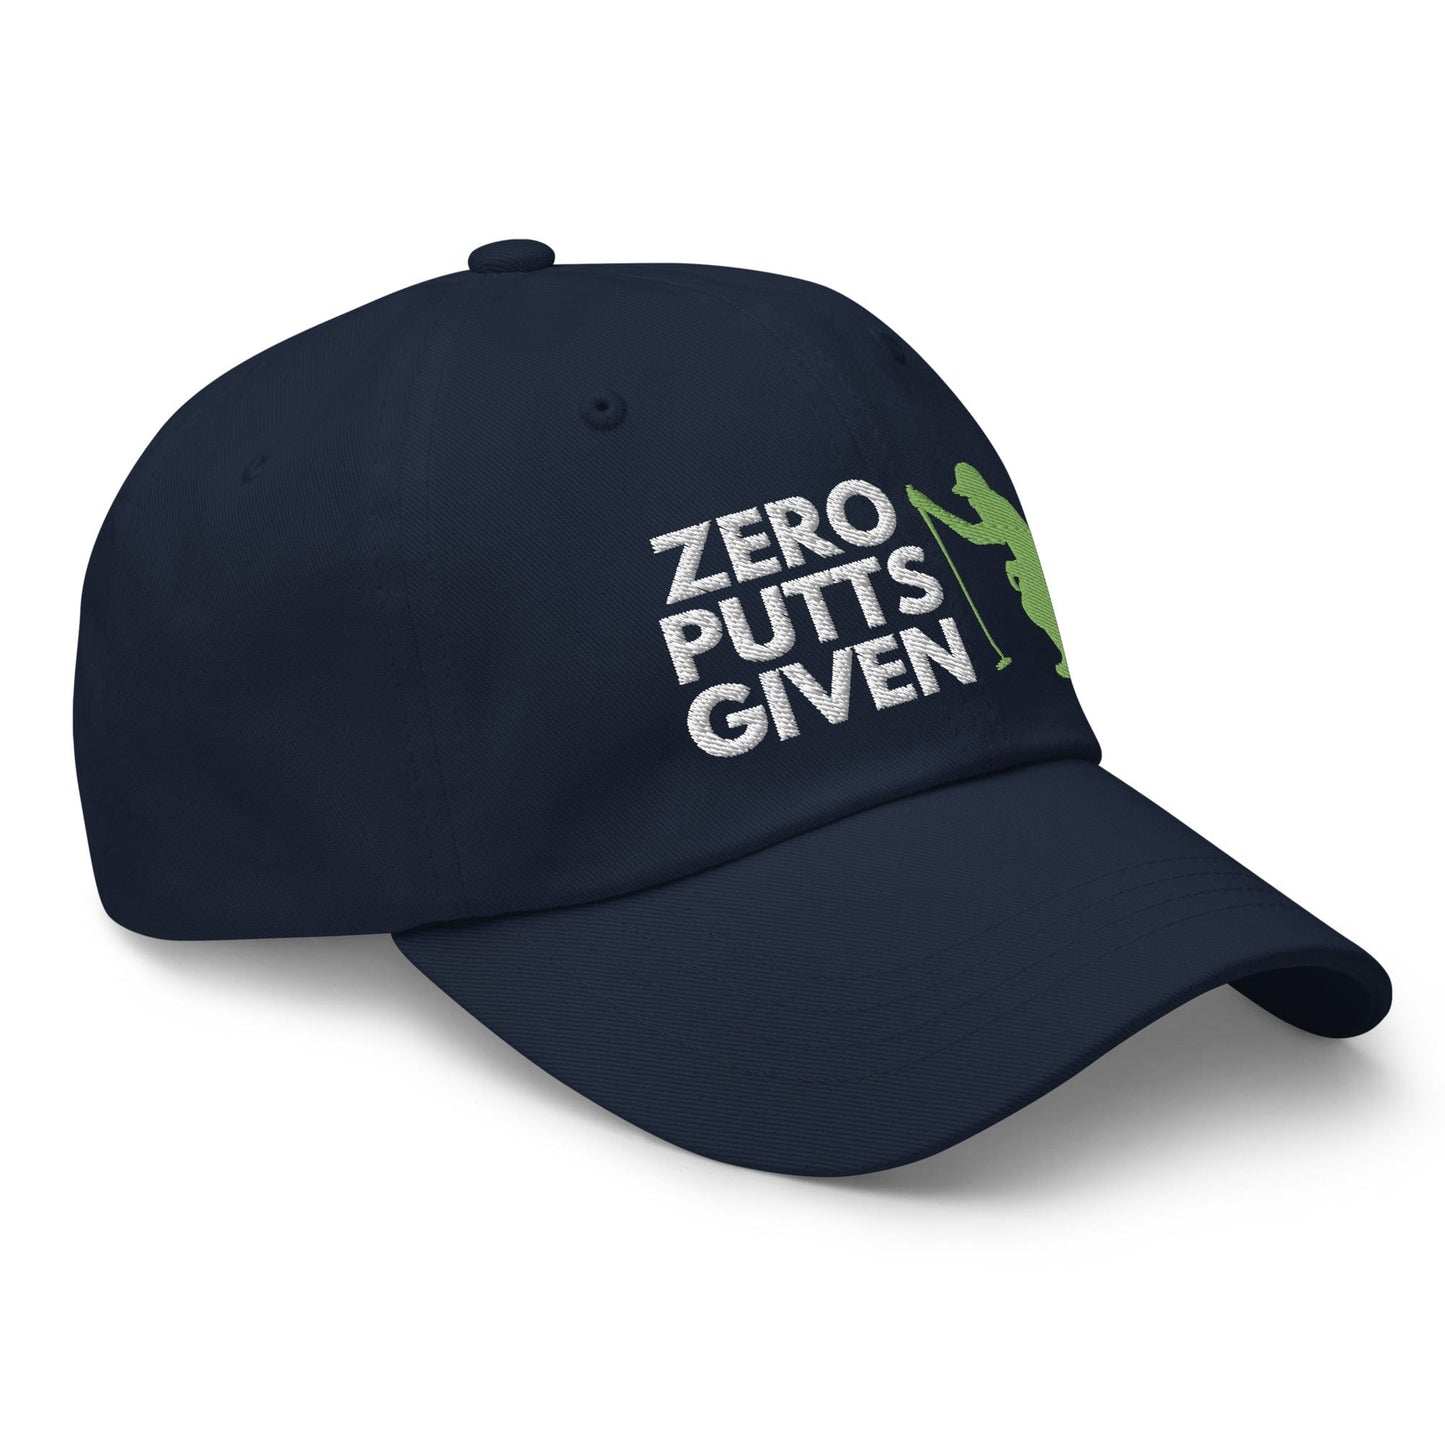 Funny Golfer Gifts  Dad Cap Navy Zero Putts Given Hat Cap